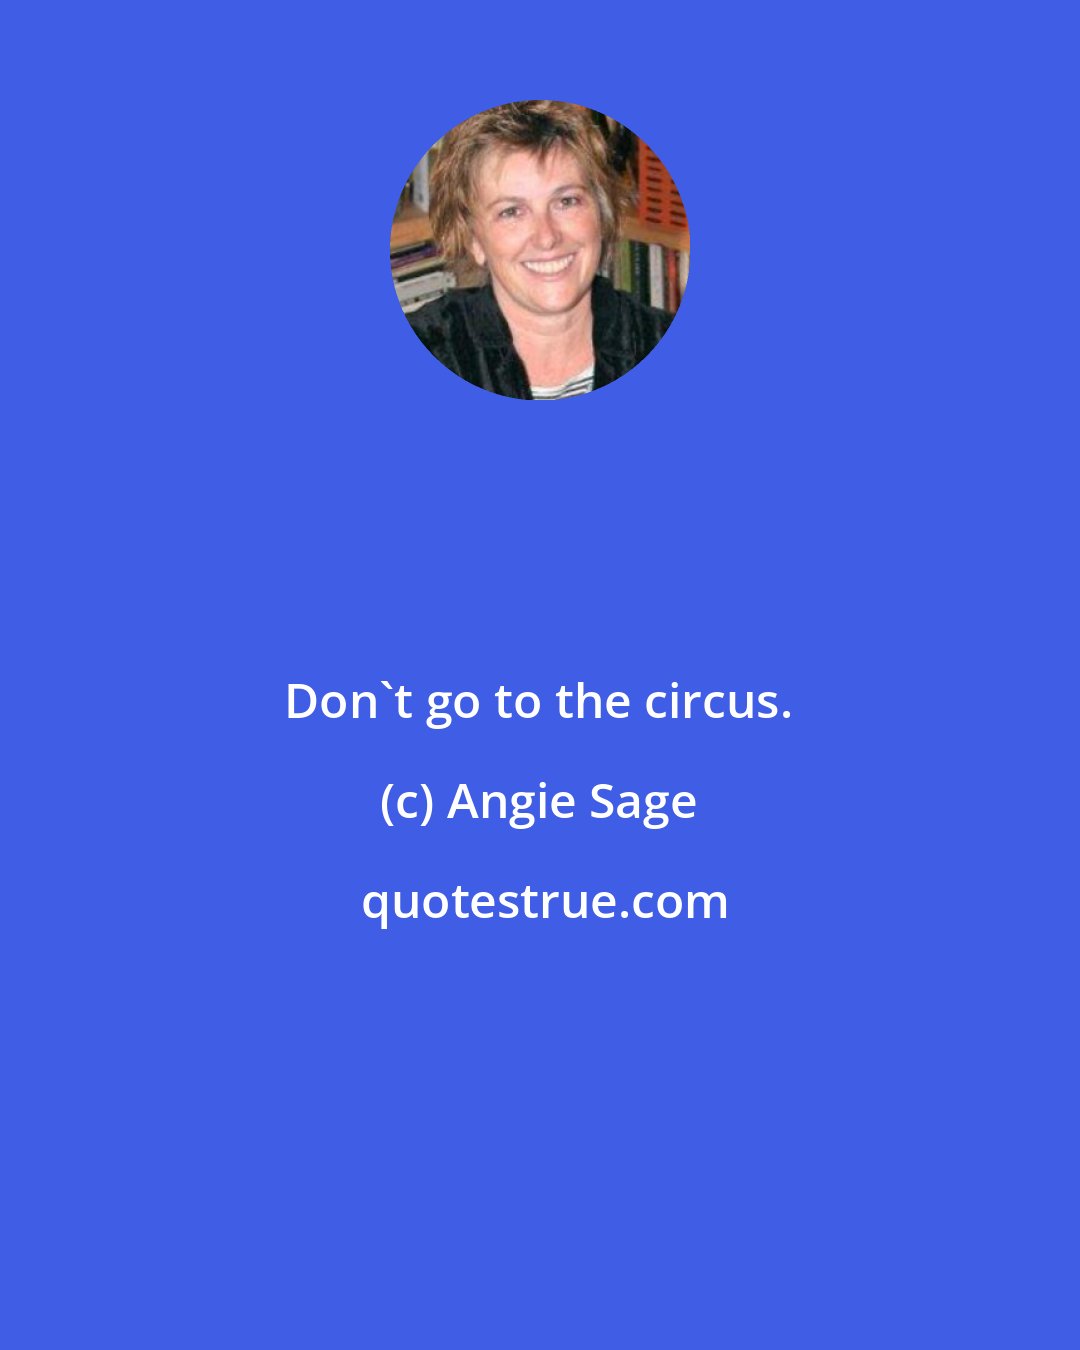 Angie Sage: Don't go to the circus.